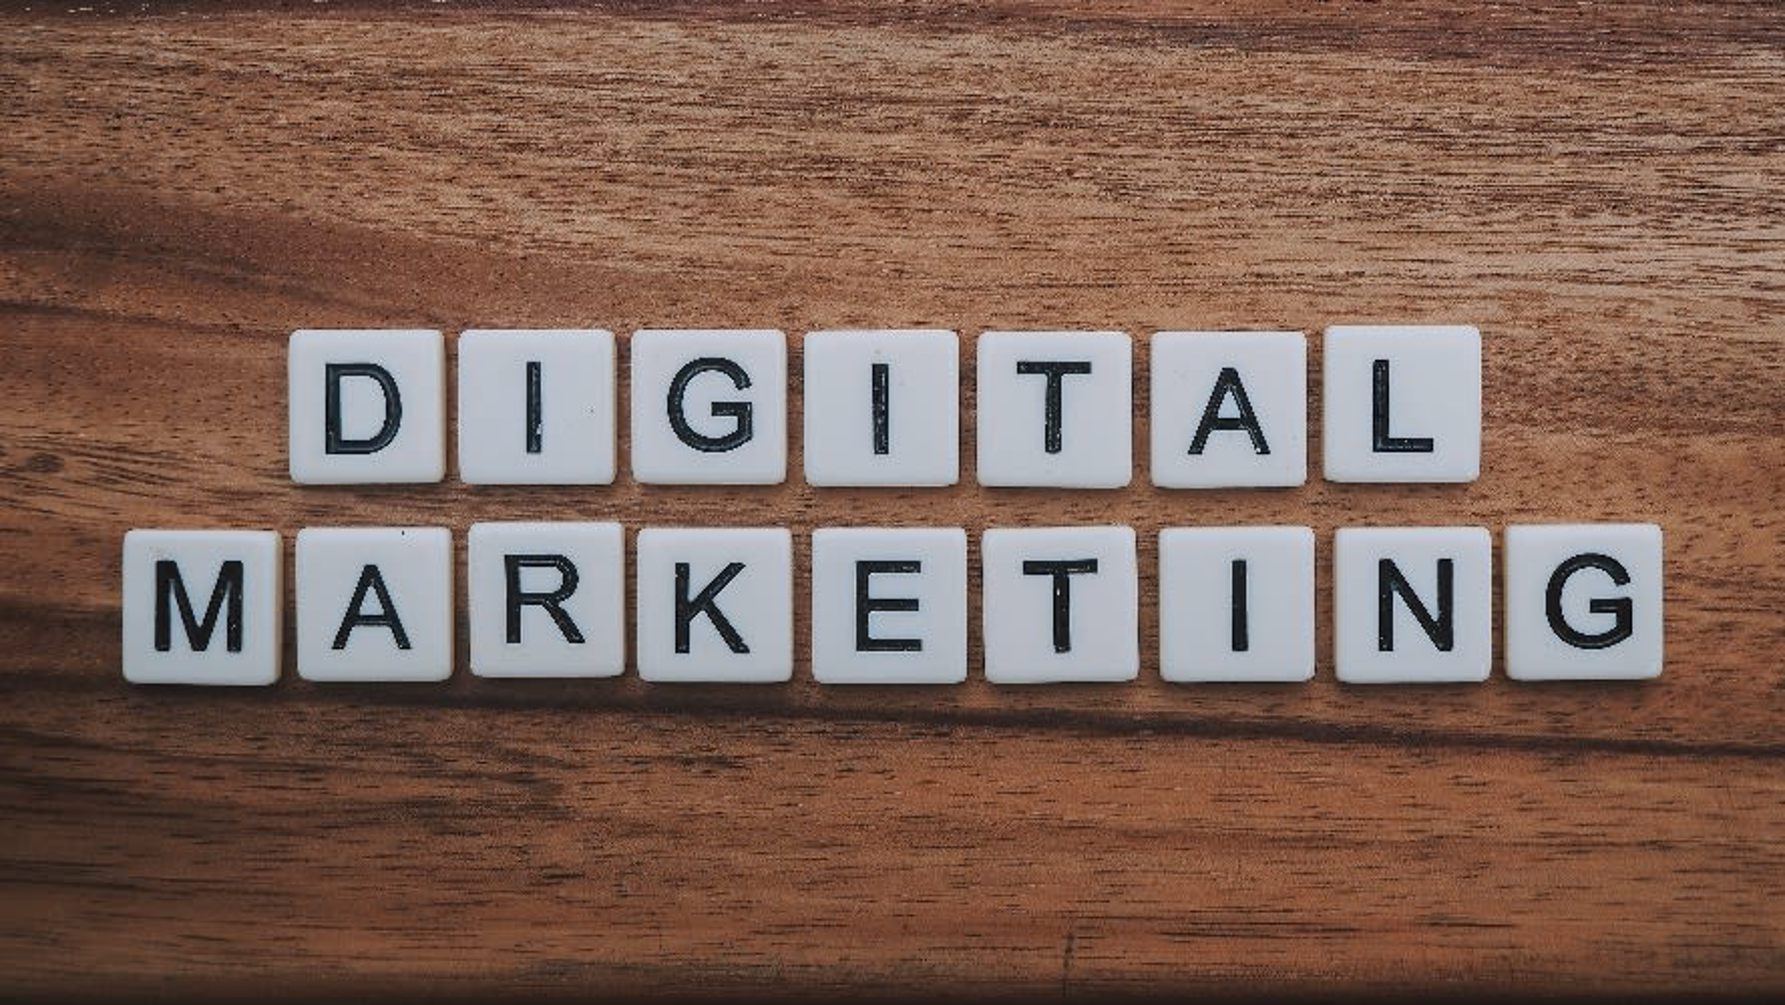 scrabble pieces on wooden table spelling out "digital marketing"